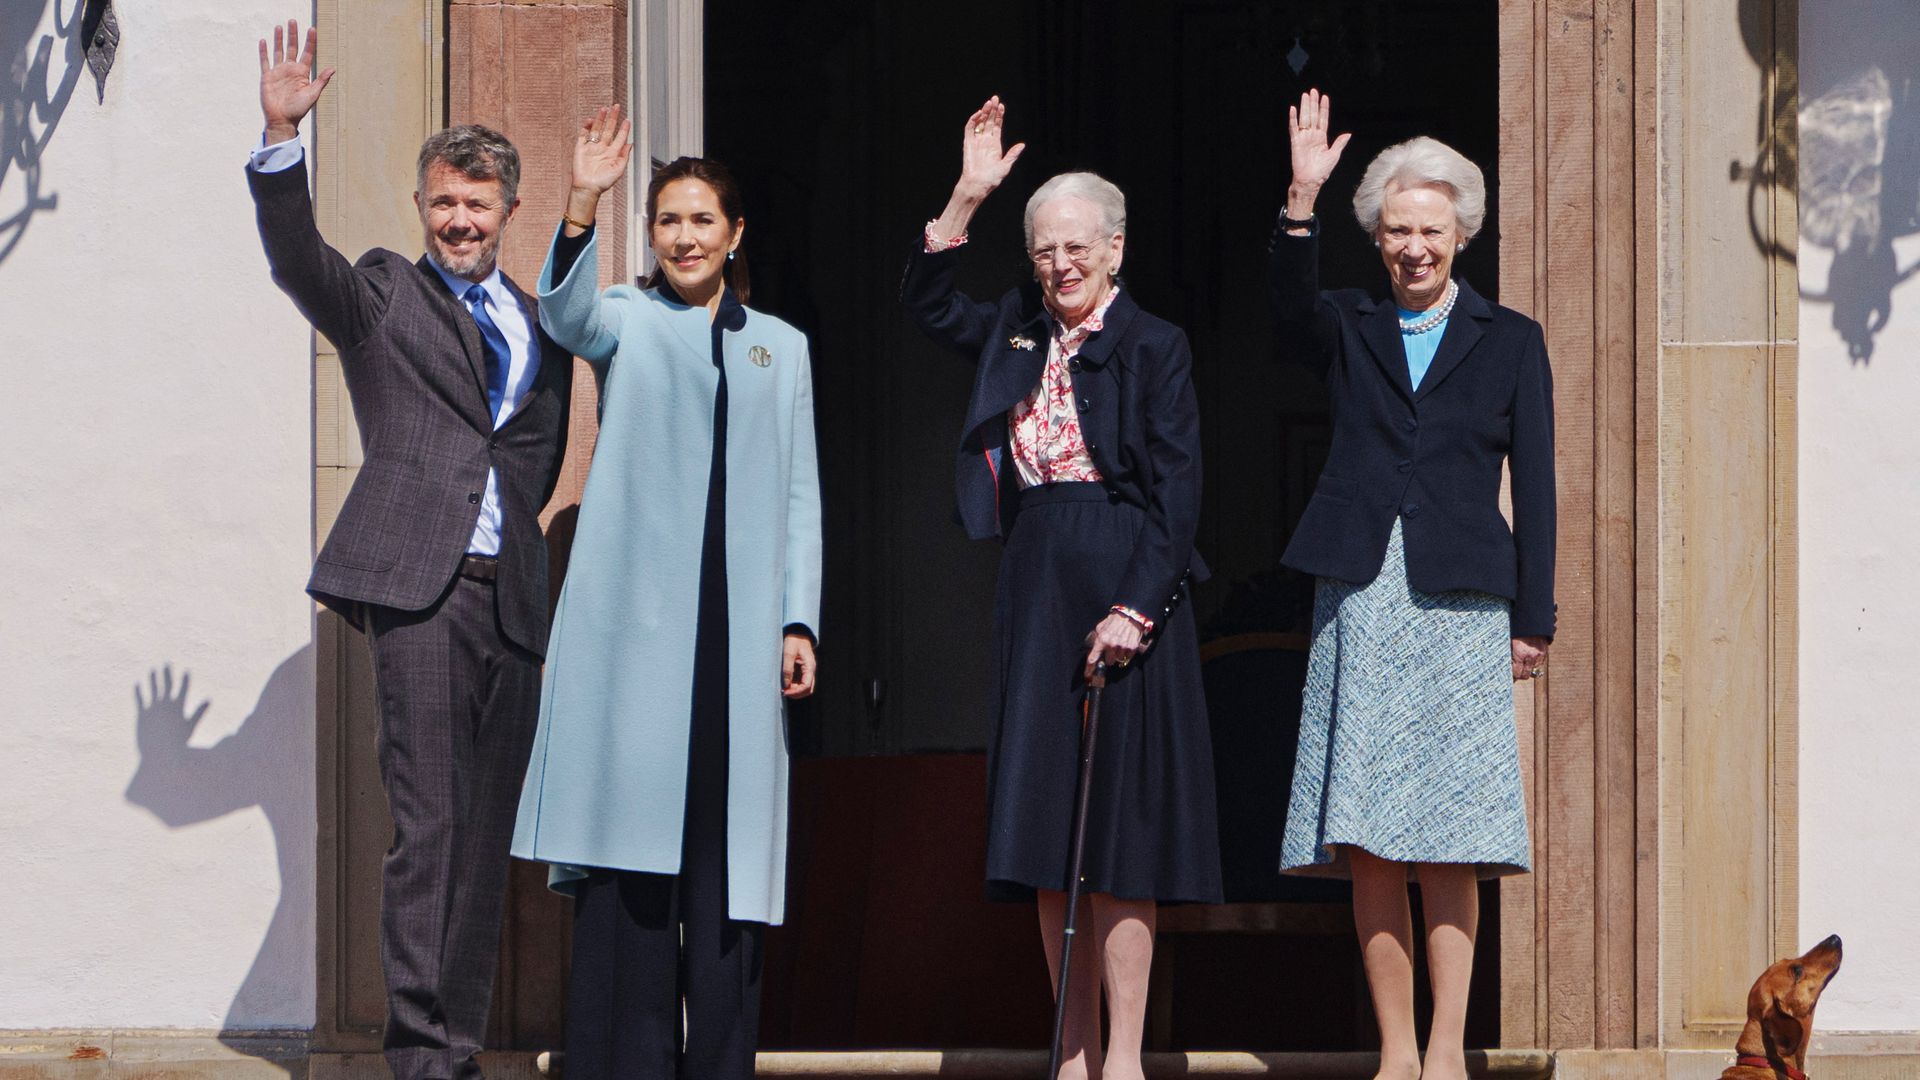 Queen Mary and King Frederik pictured together to celebrate family occasion - see photos